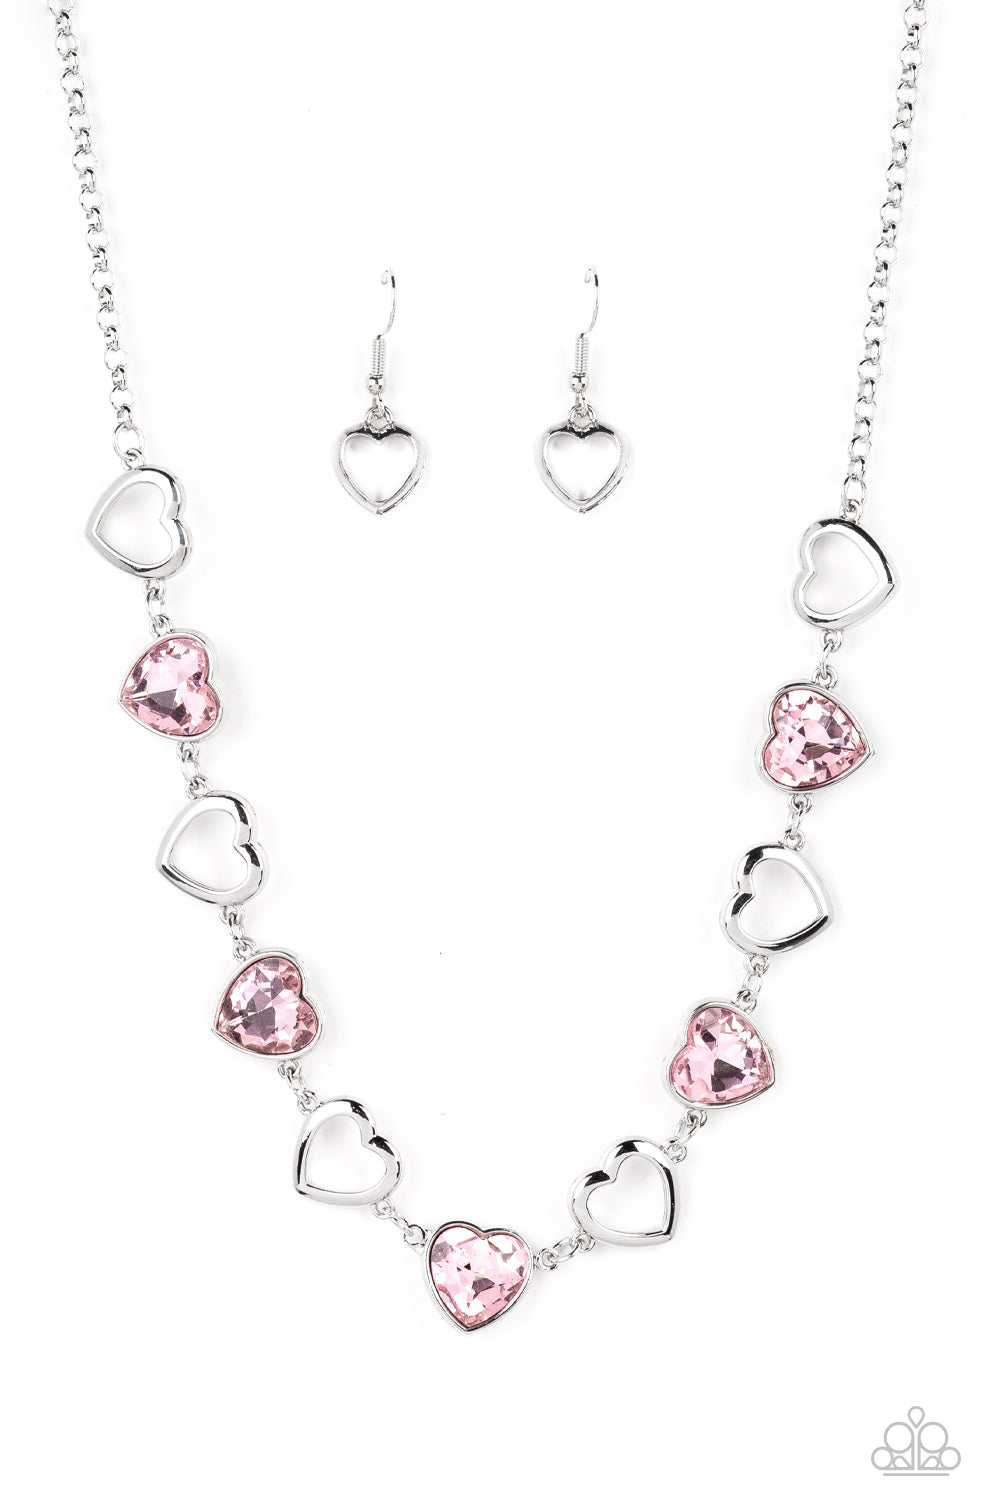 Paparazzi Accessories Contemporary Cupid - Pink Shiny, silver silhouette hearts alternate between faceted pink heart gems pressed into silver frames.The high-sheen and sparkly display coalesce around the collar for a cupid-like charm. Features an adjustab